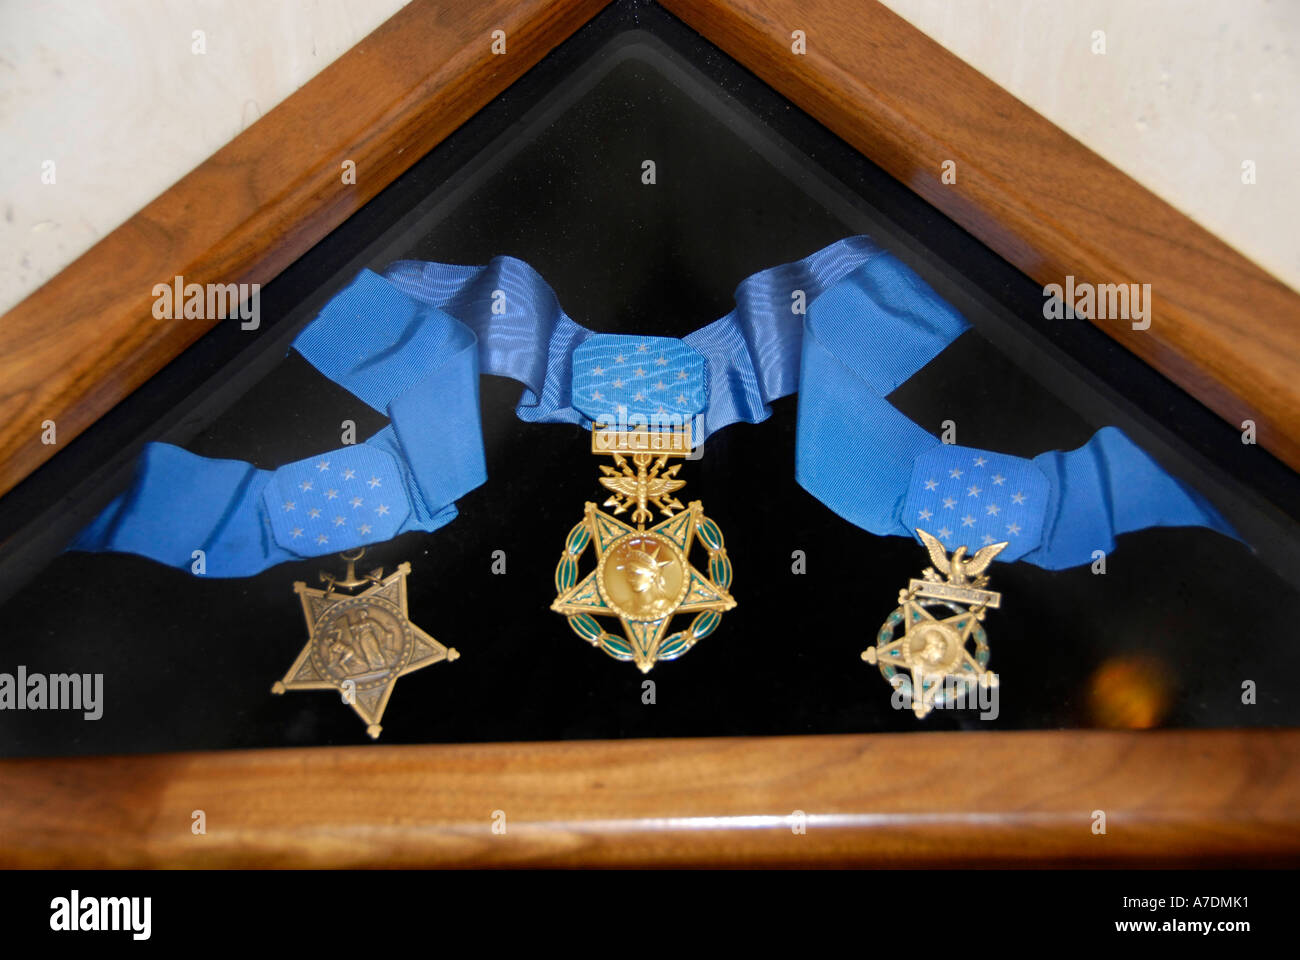 Congressional Medal Of Honor im Capitol Building Tallahassee Florida angezeigt Stockfoto